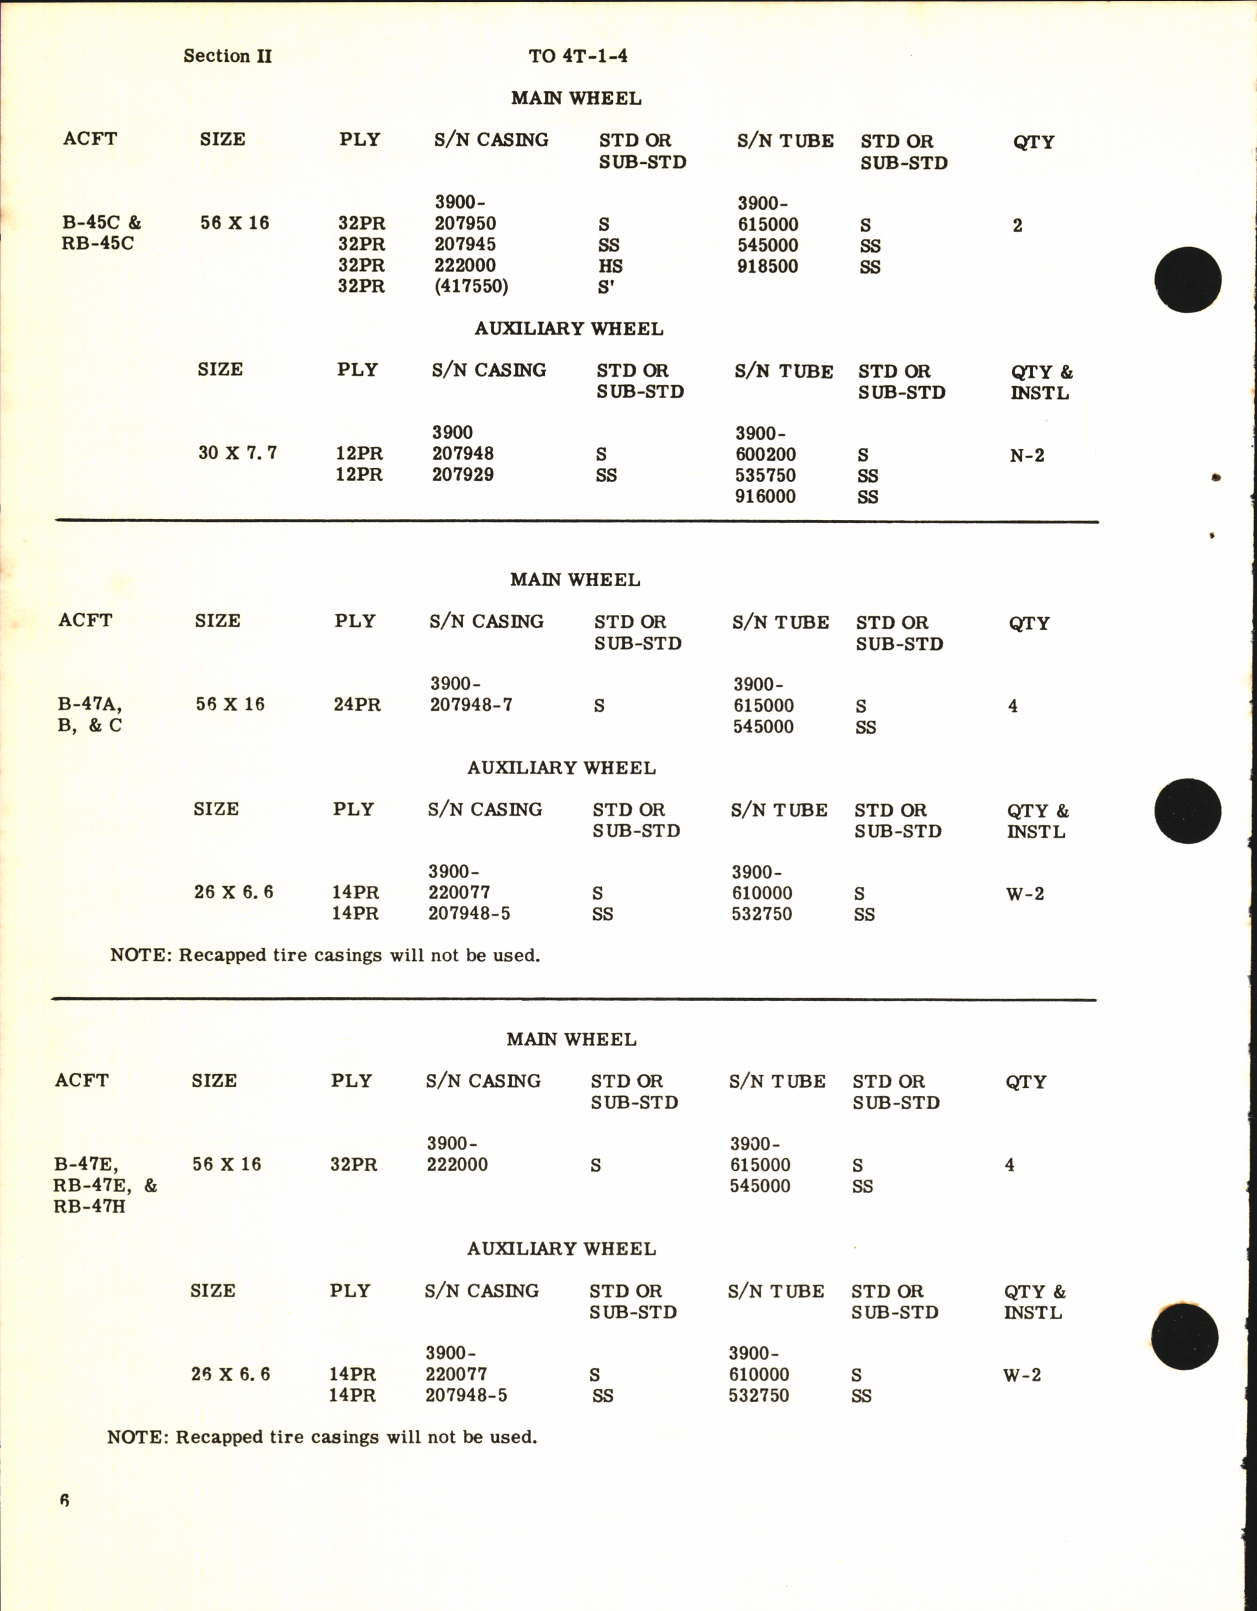 Sample page 8 from AirCorps Library document: Application Table for Aircraft Tire Casings and Tubes